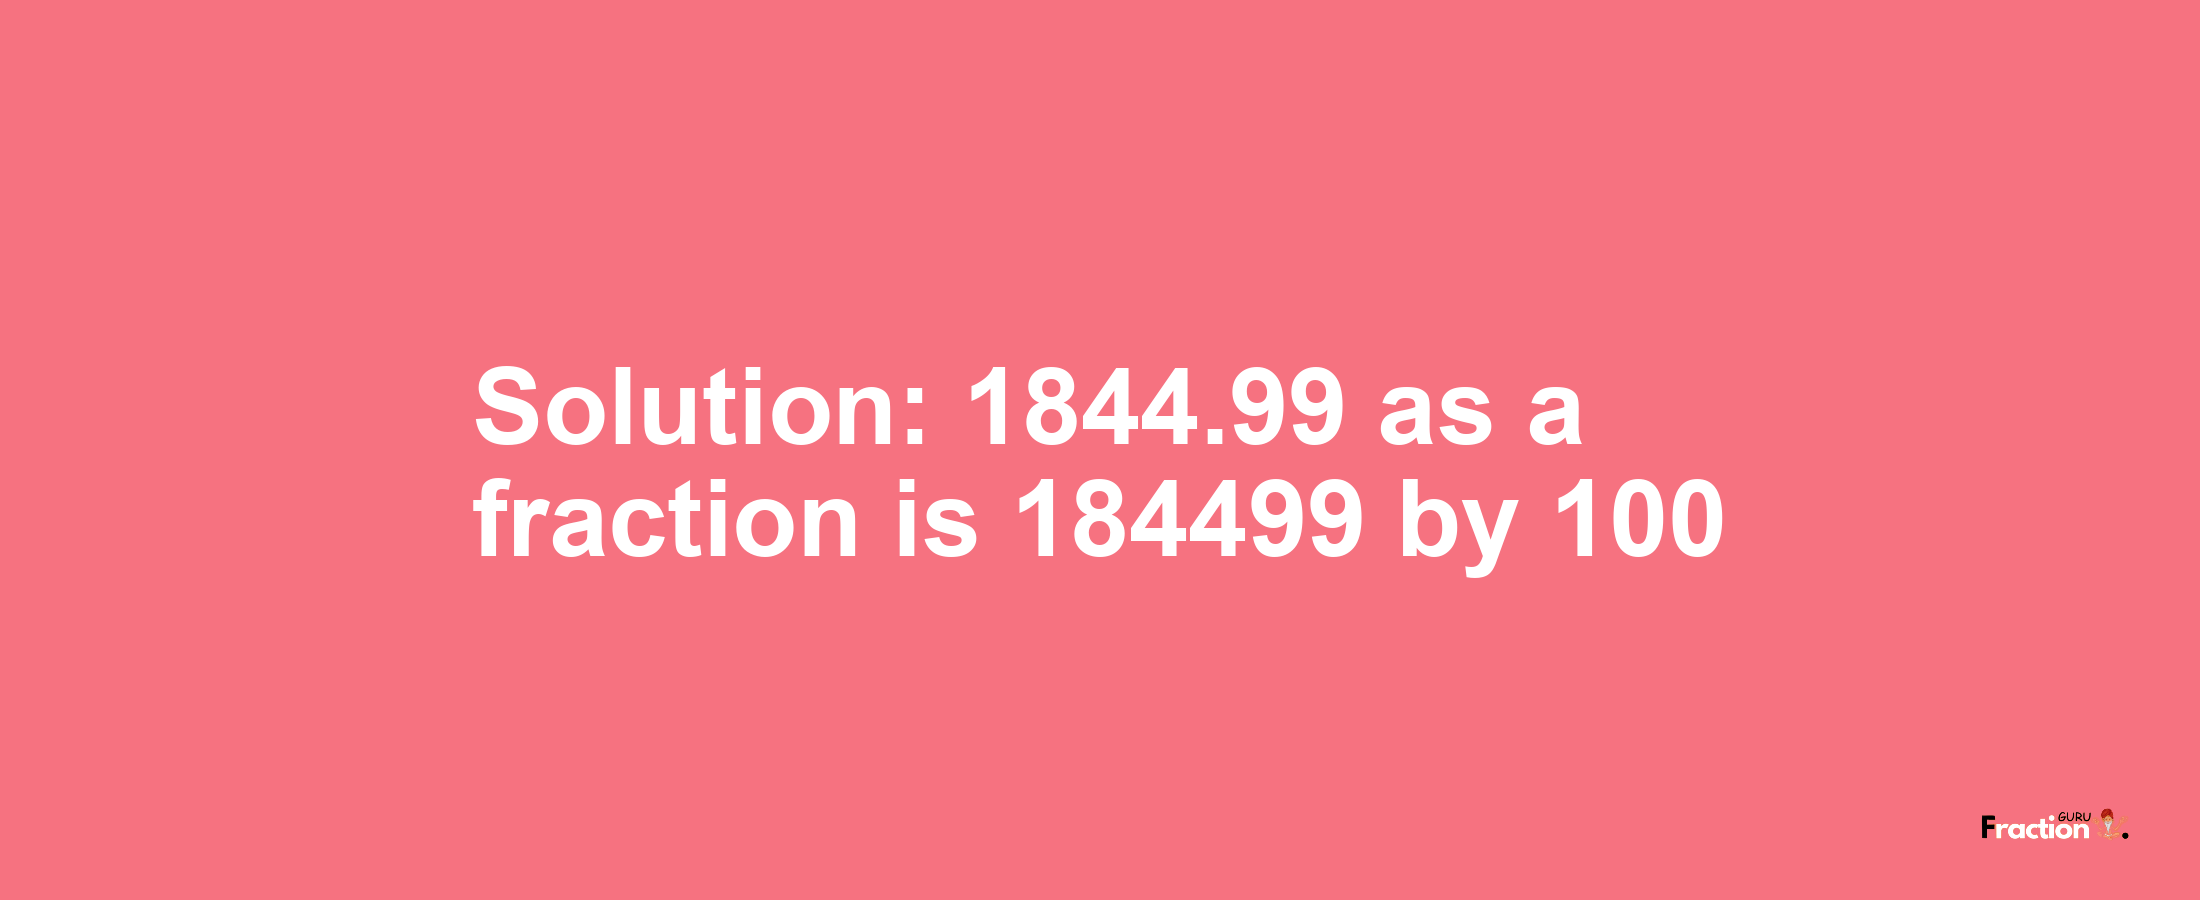 Solution:1844.99 as a fraction is 184499/100